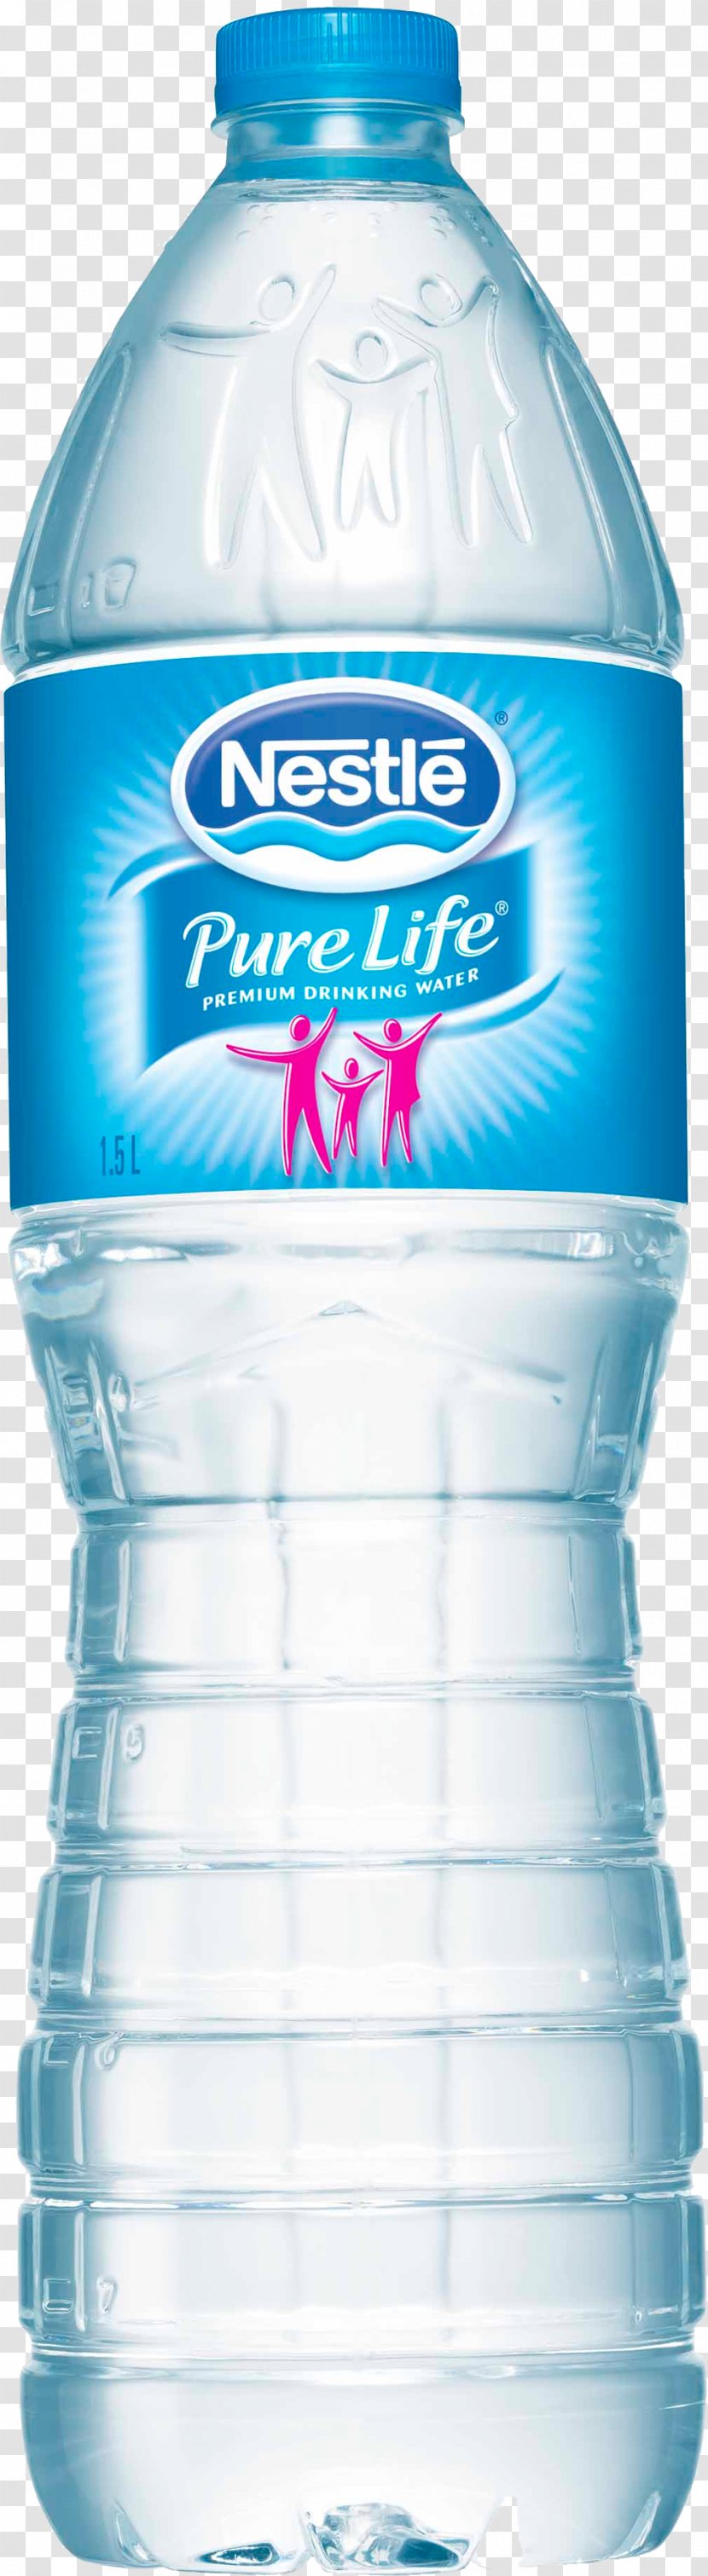 Nestlé Pure Life Mineral Water Waters North America Bottled - Plastic Bottle - Image Transparent PNG